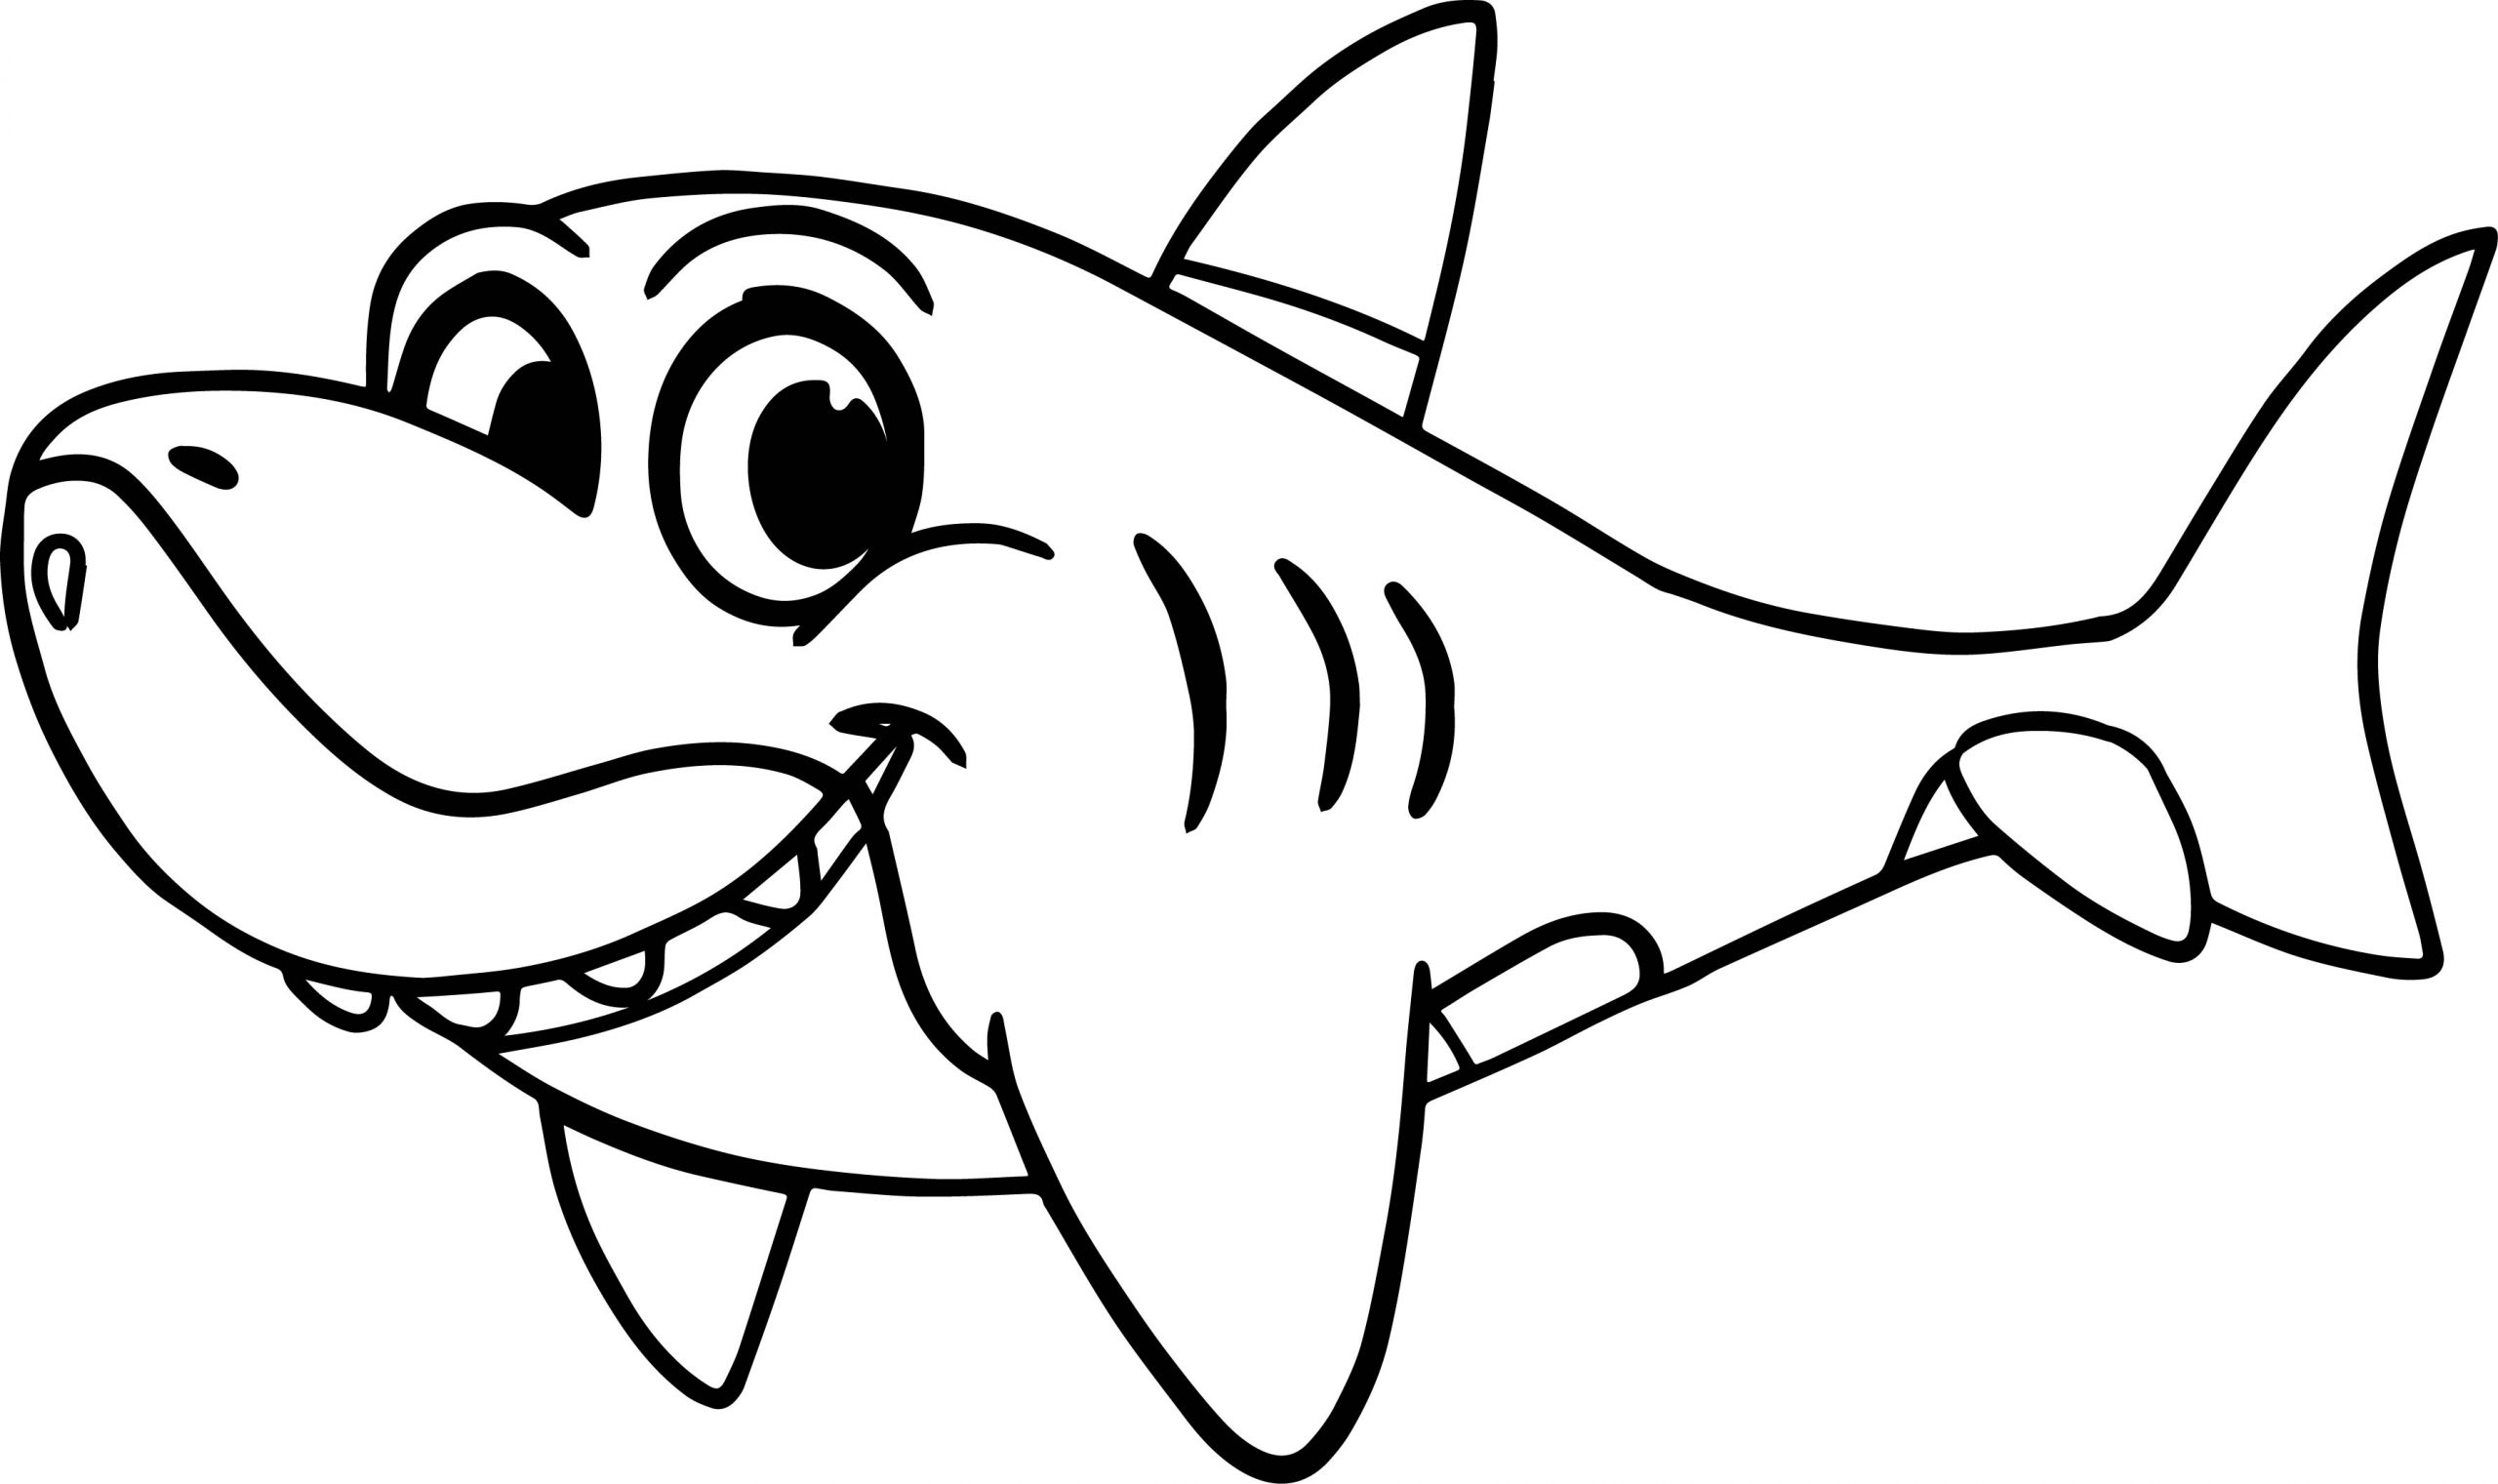 Coloring Pages : Jaws Coloring Pages At Getdrawings Free Download Pictures  Shark For Kidstable Tot 49 Extraordinary Jaws Coloring Pages Photo  Inspirations ~ Ny19 Votes